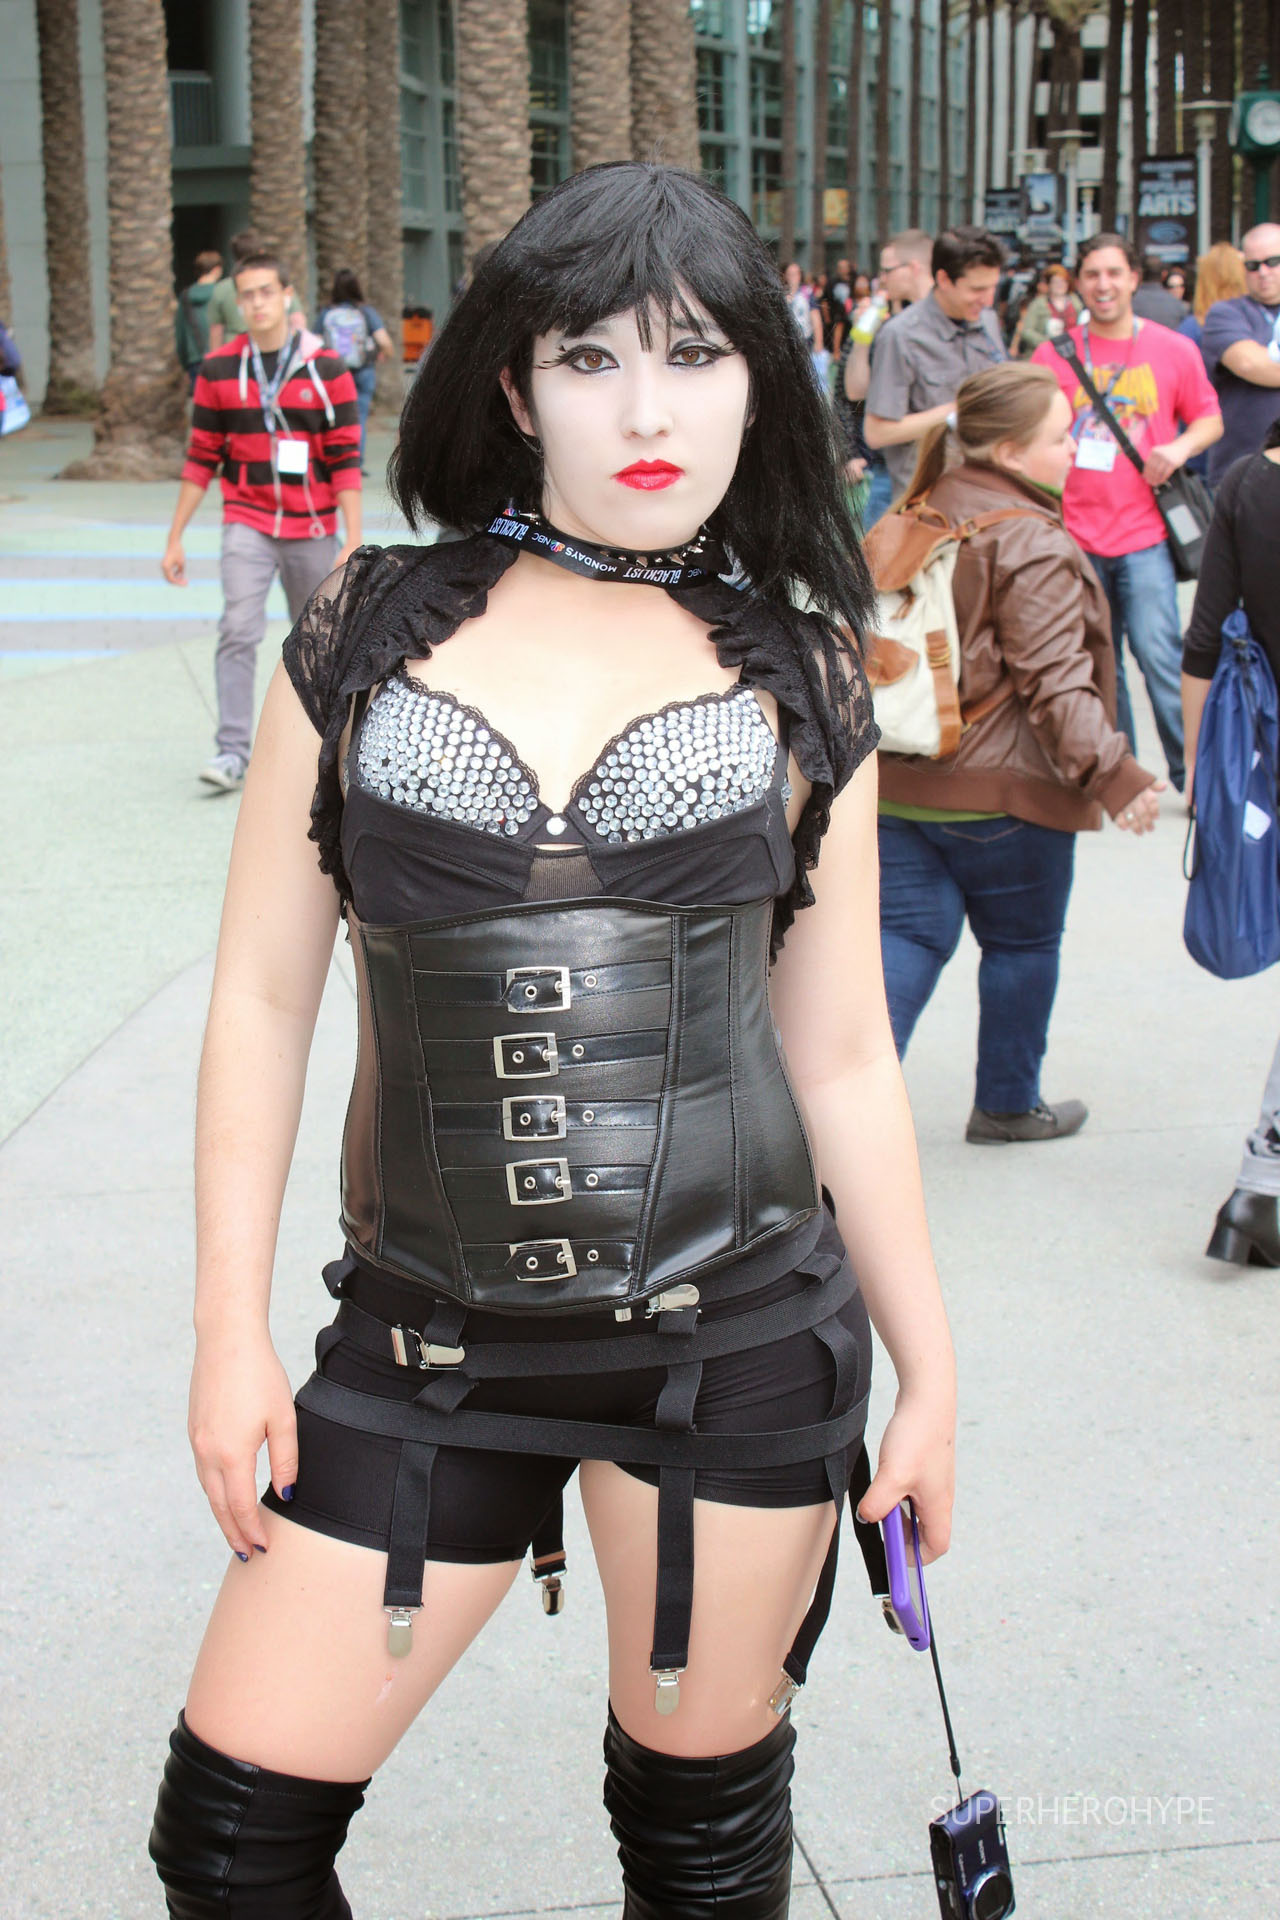 The First Cosplay Photos From WonderCon 2014! Comic Book Movies and